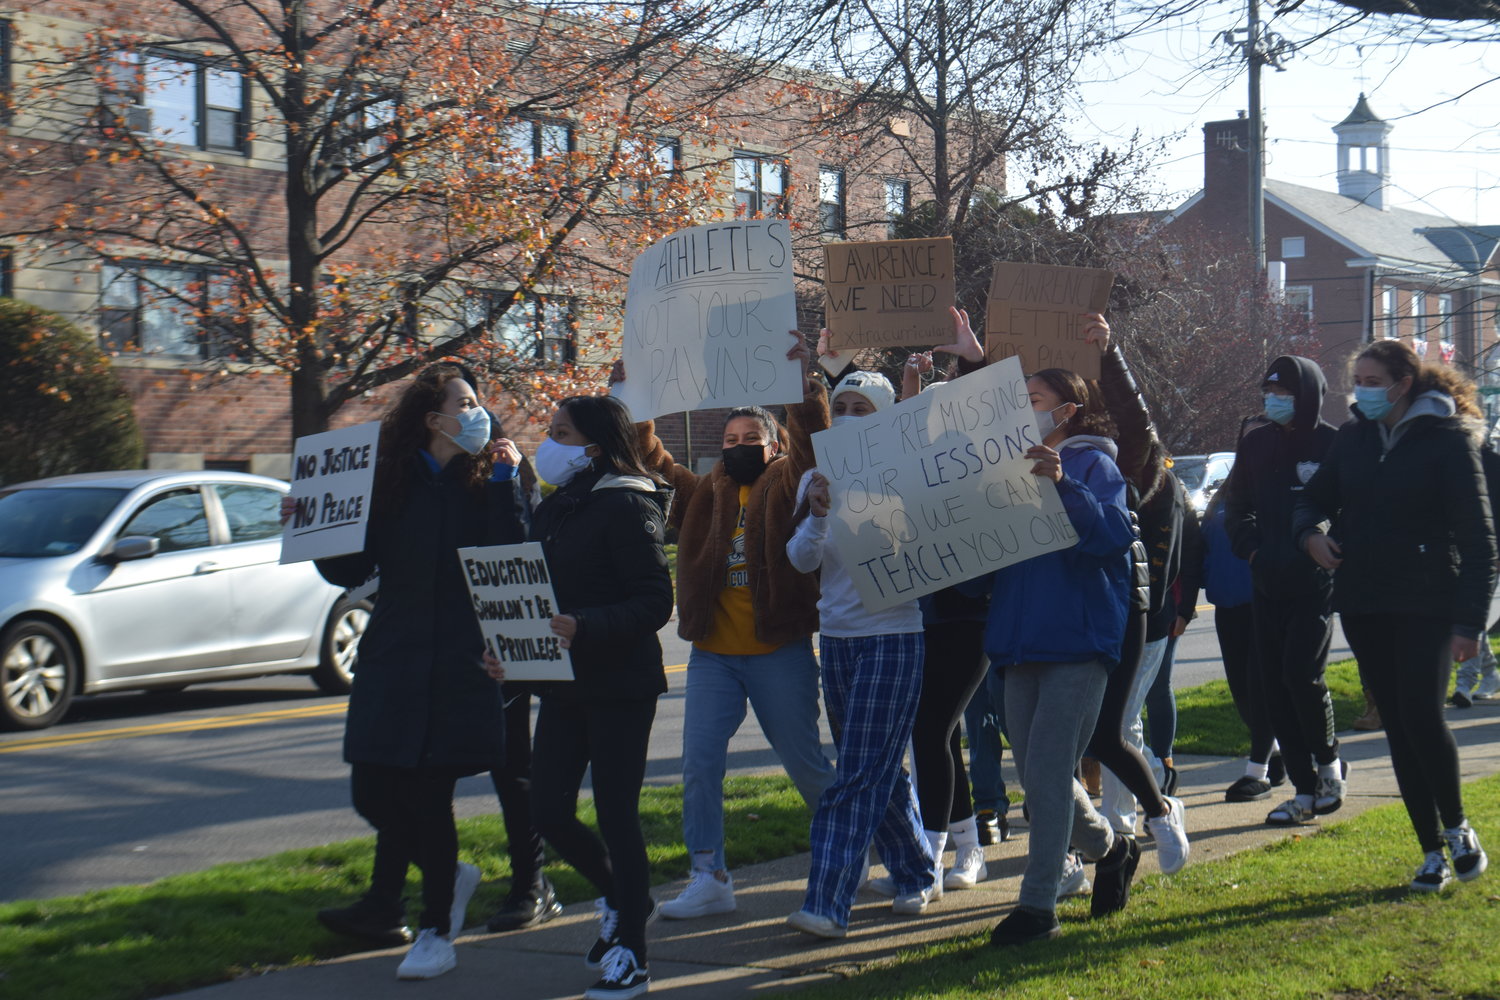 Lawrence High School students protested the loss of two sports seasons and not having virtual clubs as they marched along Cedarhurst Avenue in Cedarhurst on Dec. 11.